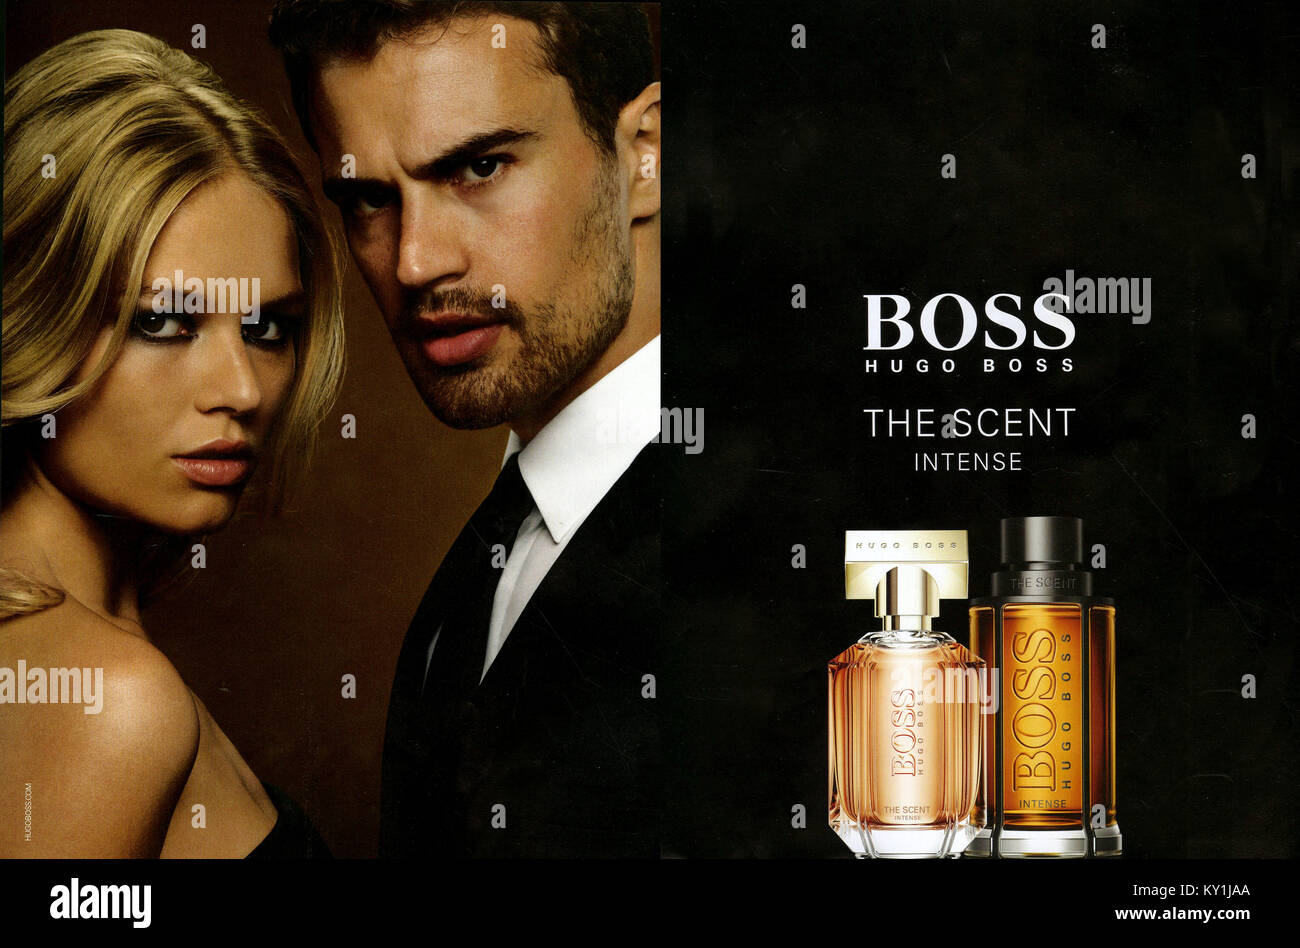 boss aftershave advert